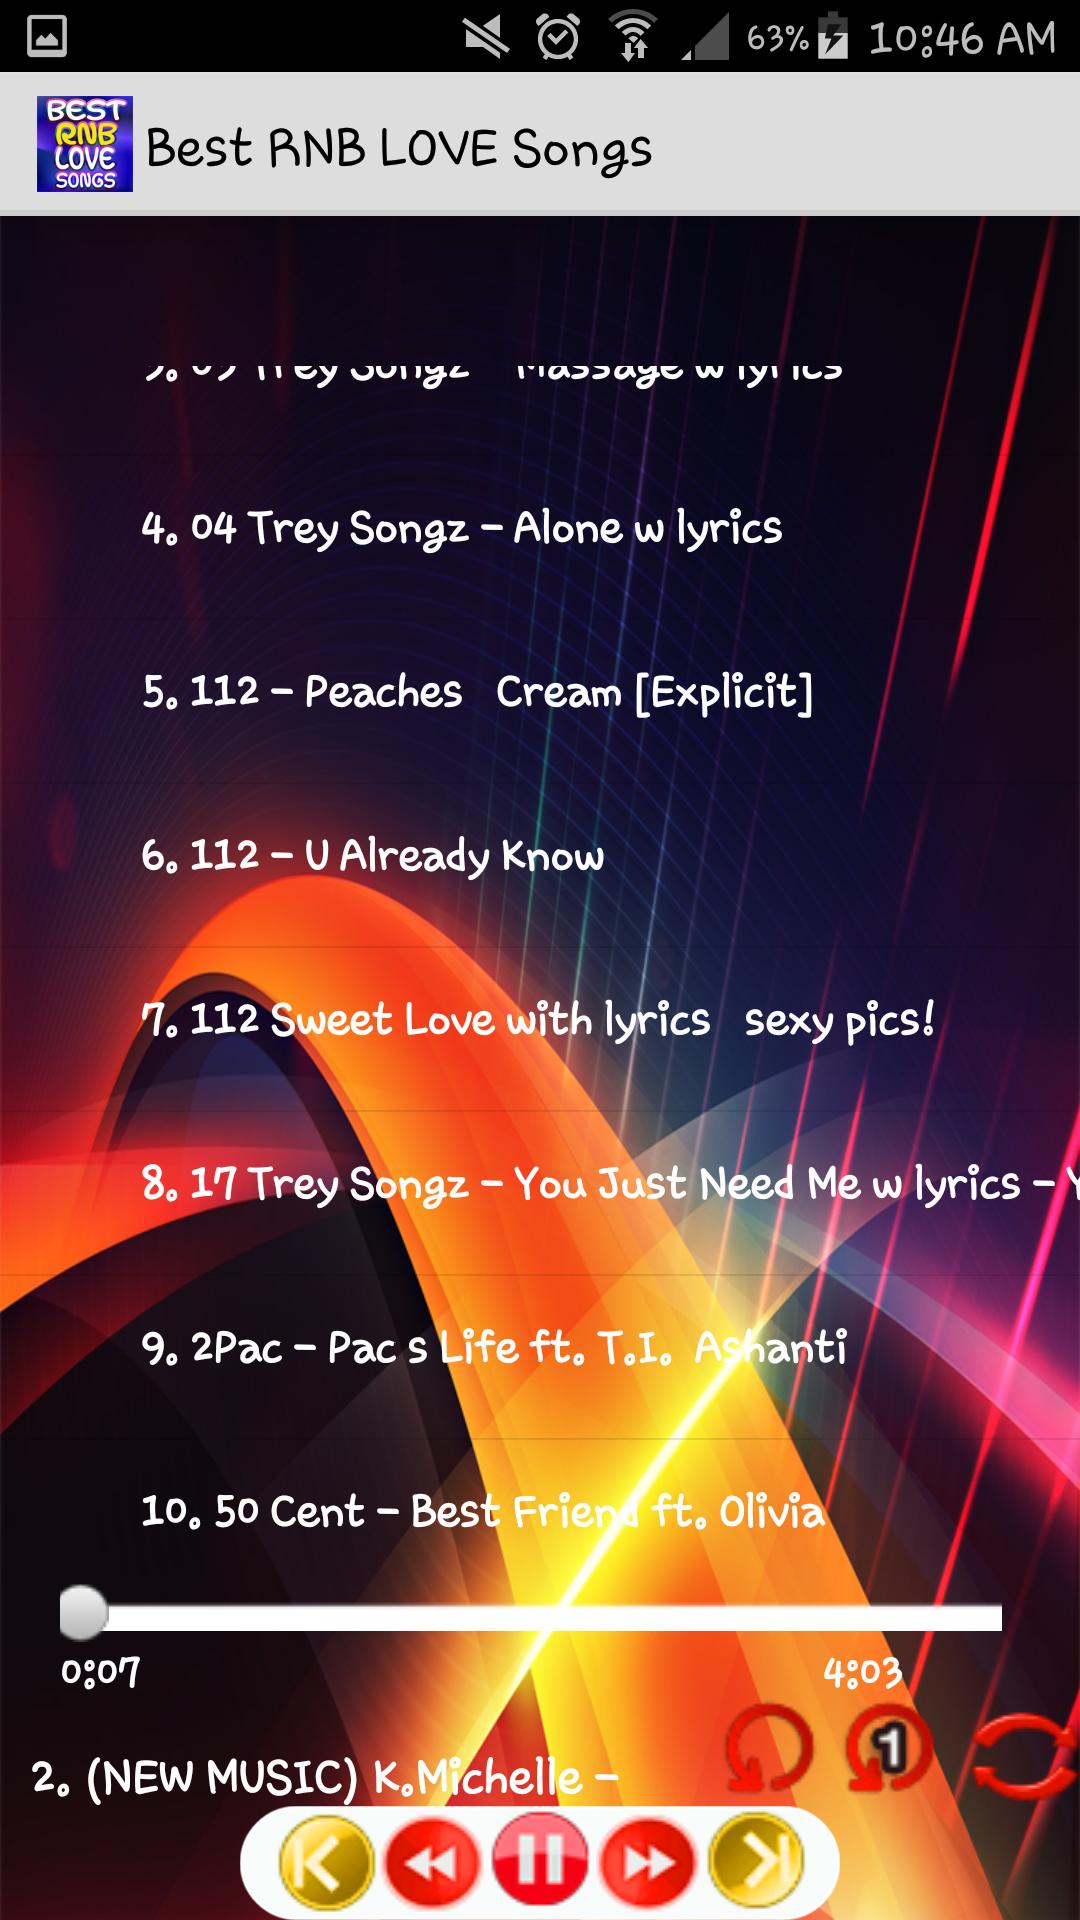 Best RNB Love Songs mp3 for Android - APK Download